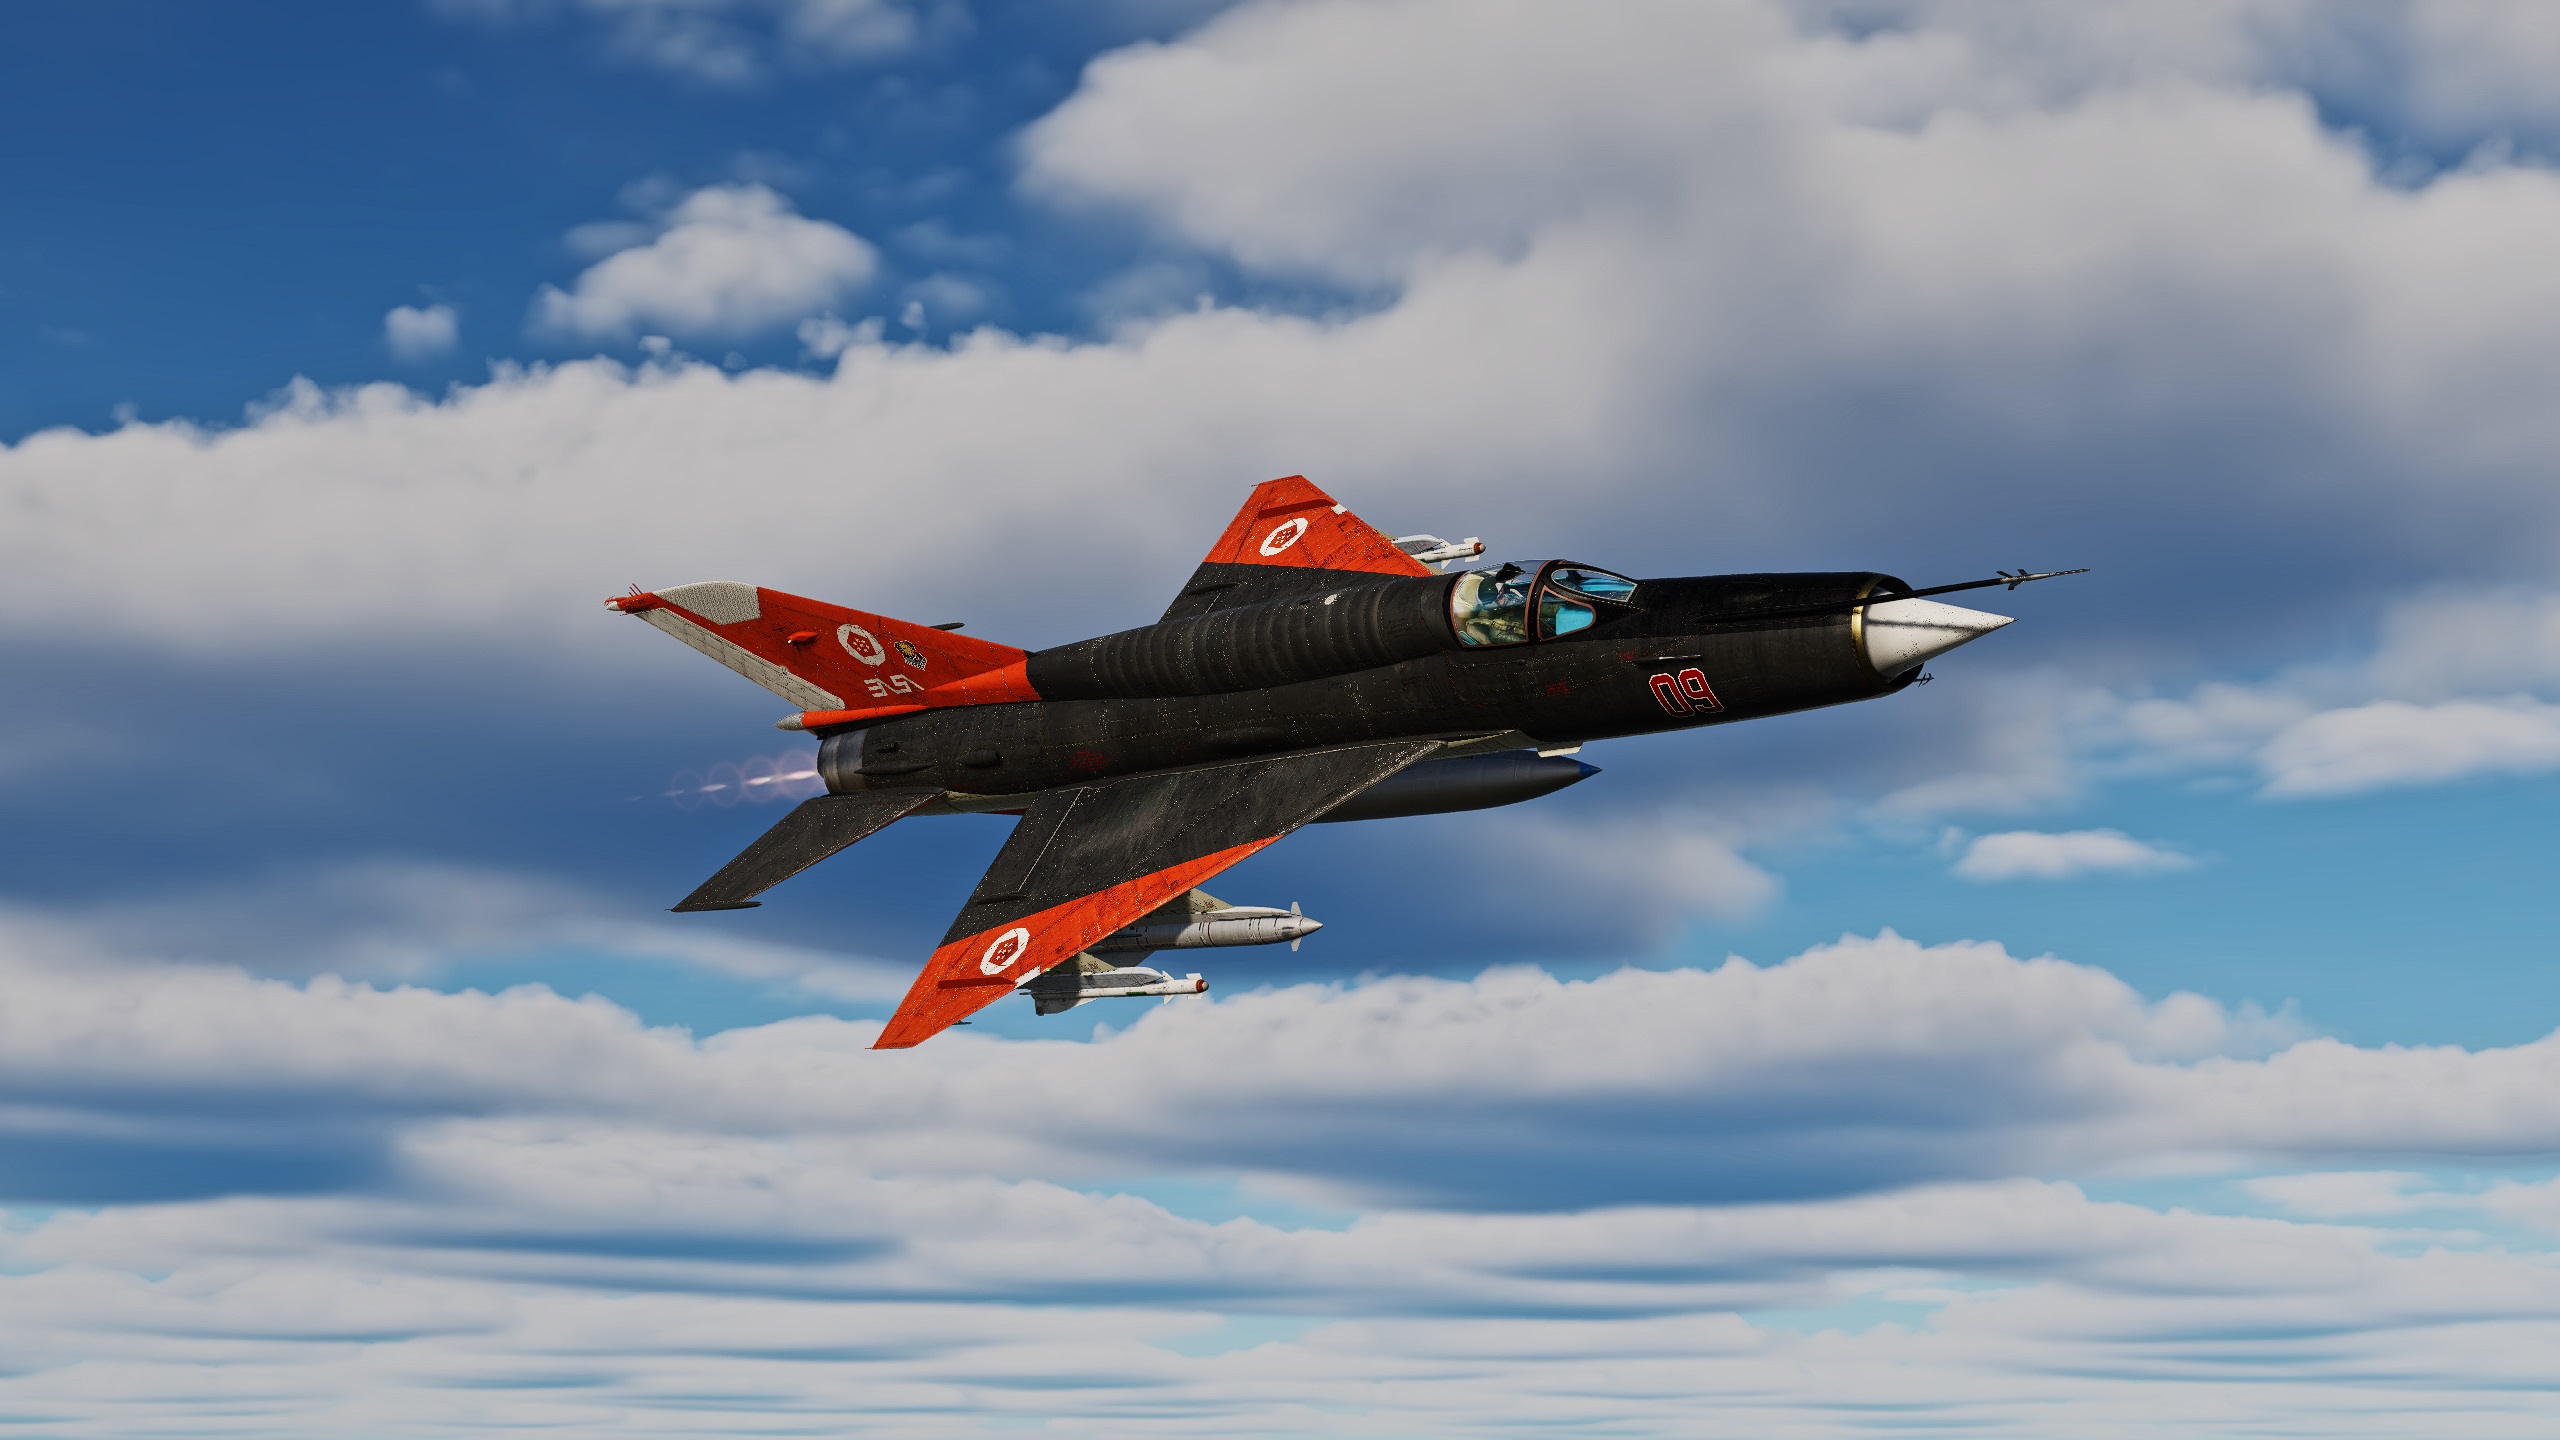 ACE COMBAT SOL 1 MIHALY SHILAGE